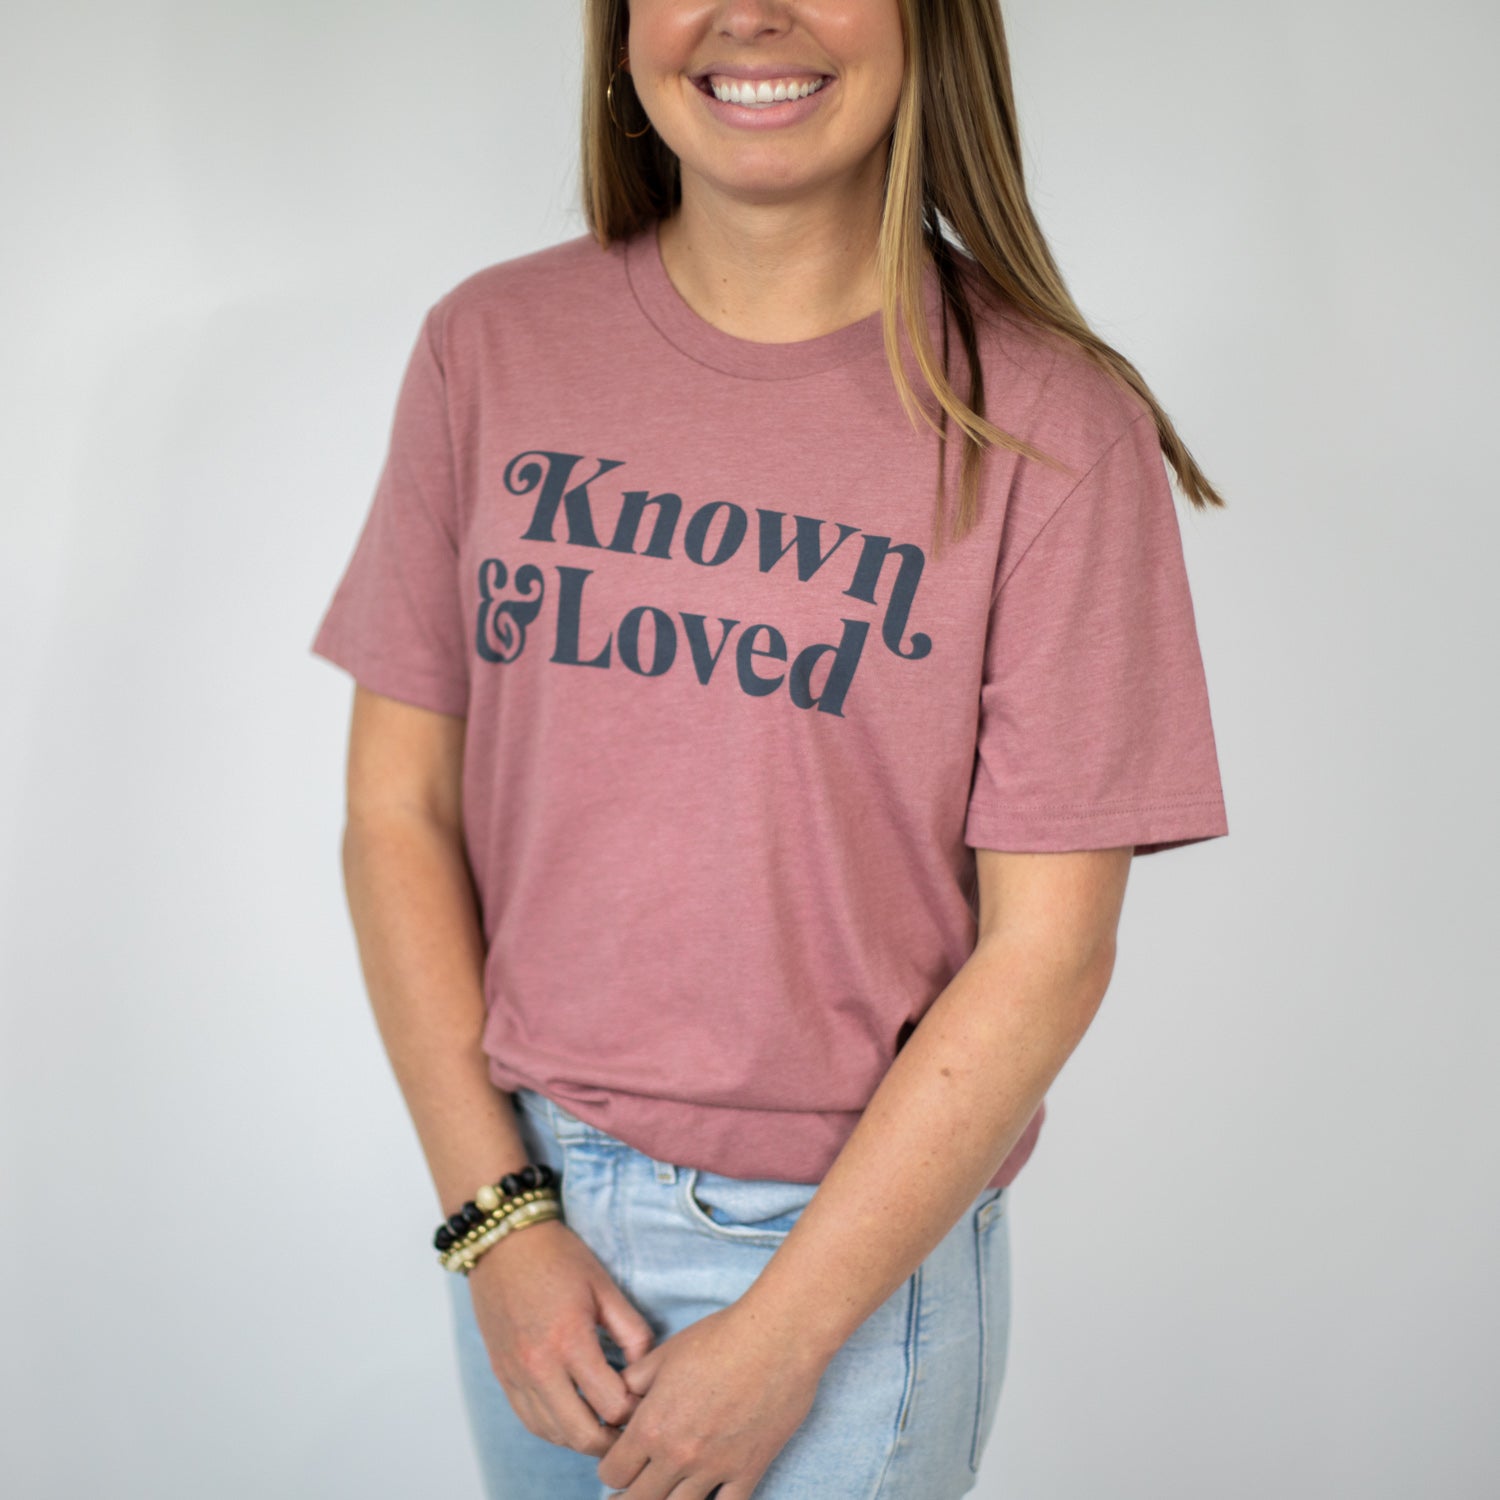 Known & Loved T-Shirt